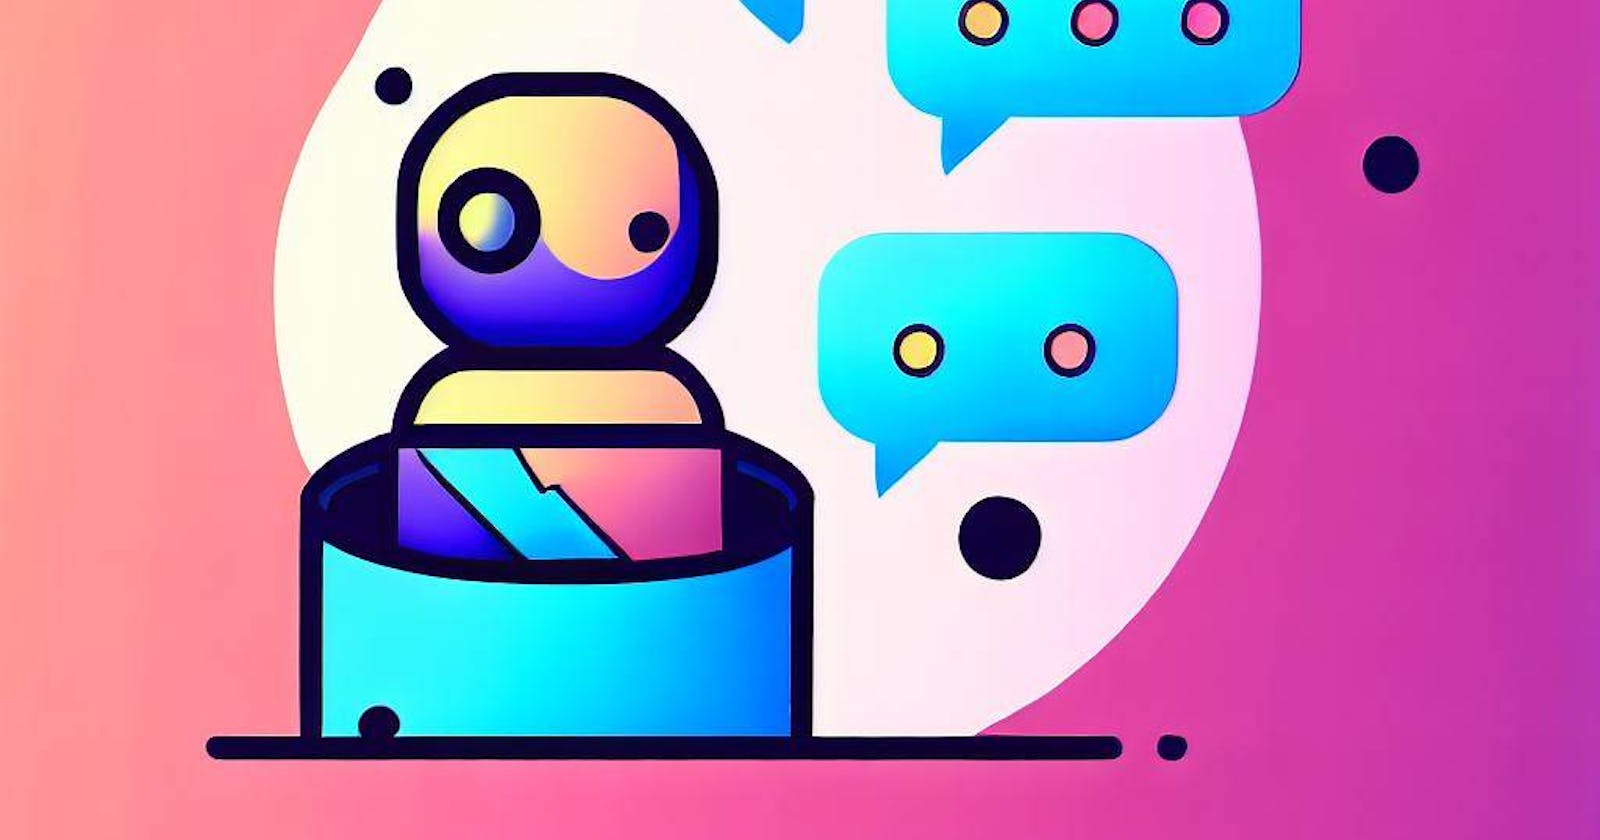 How to Use Python to Create a Chatbot: A Tutorial on How to Use Python, NLTK, and Flask to Build a Simple and Interactive Chatbot